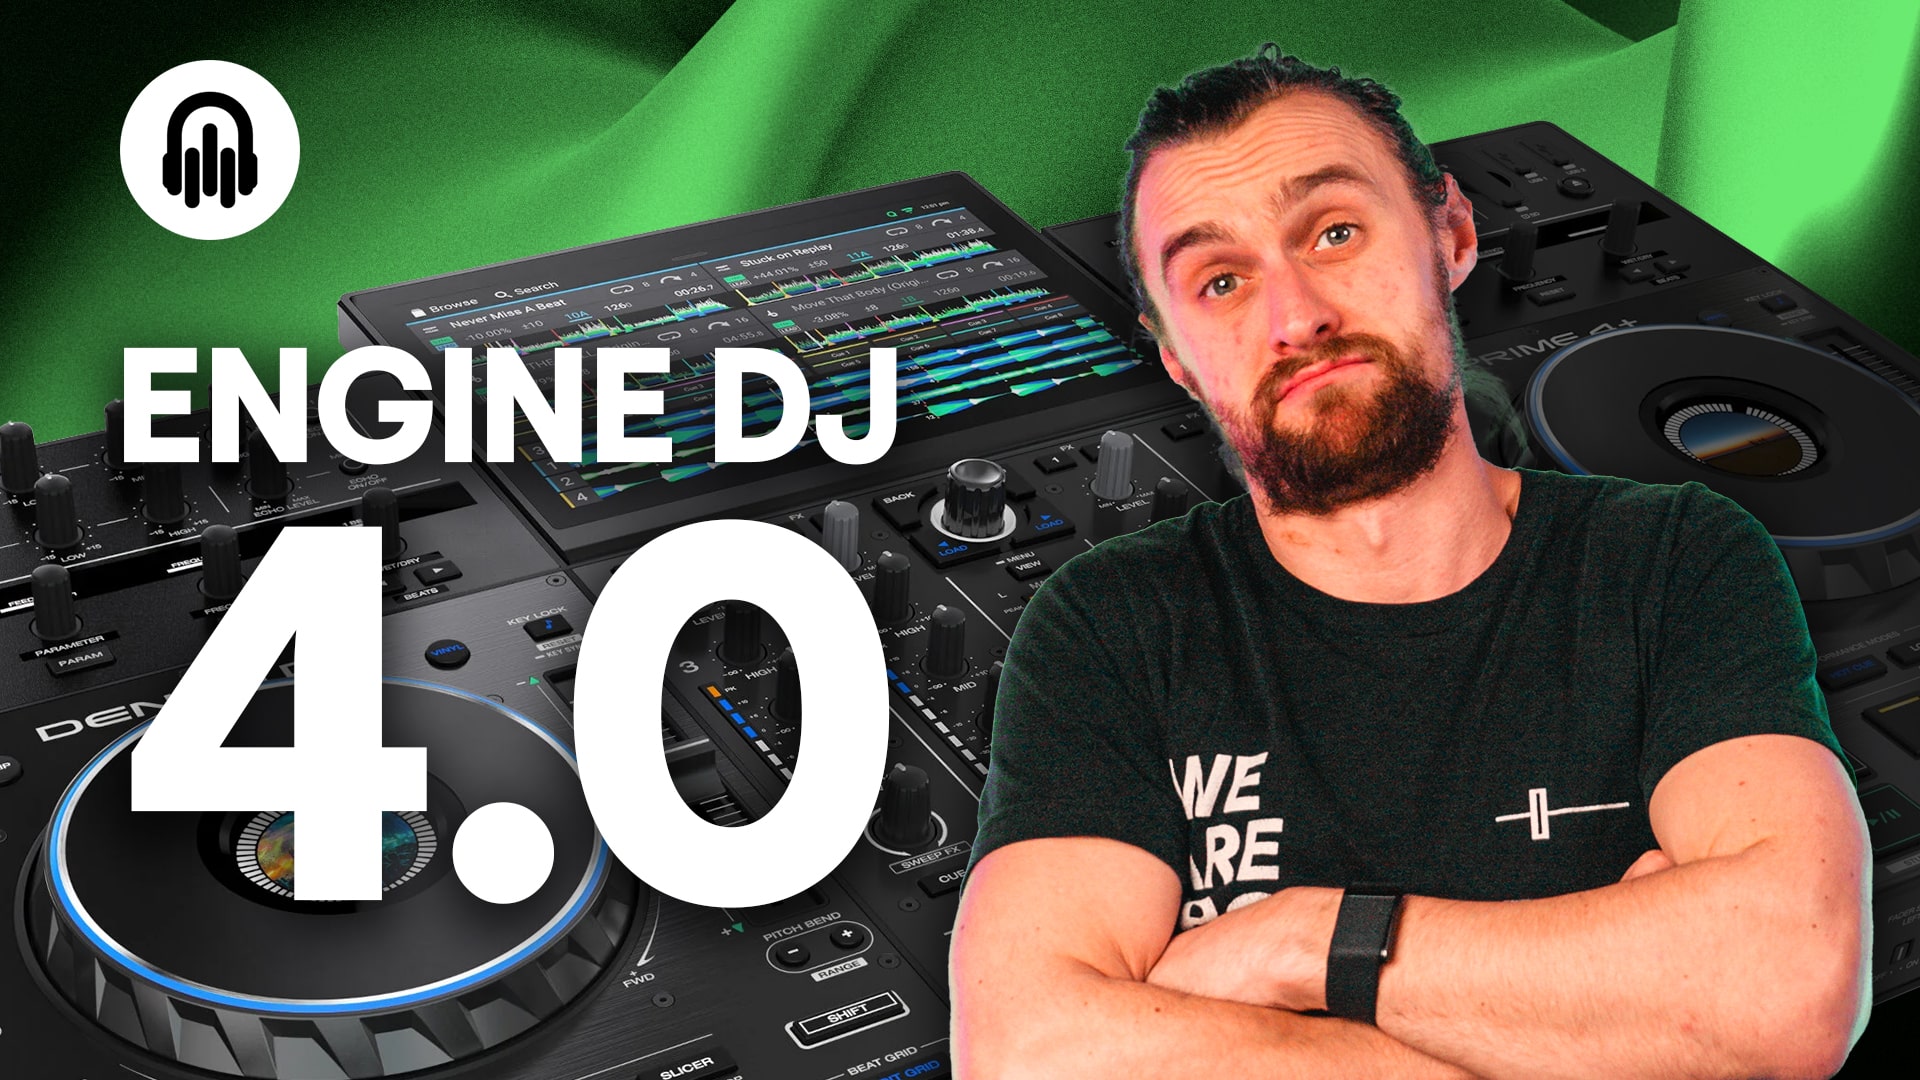 Engine DJ gets sleek new look and performance gains with version 4.0